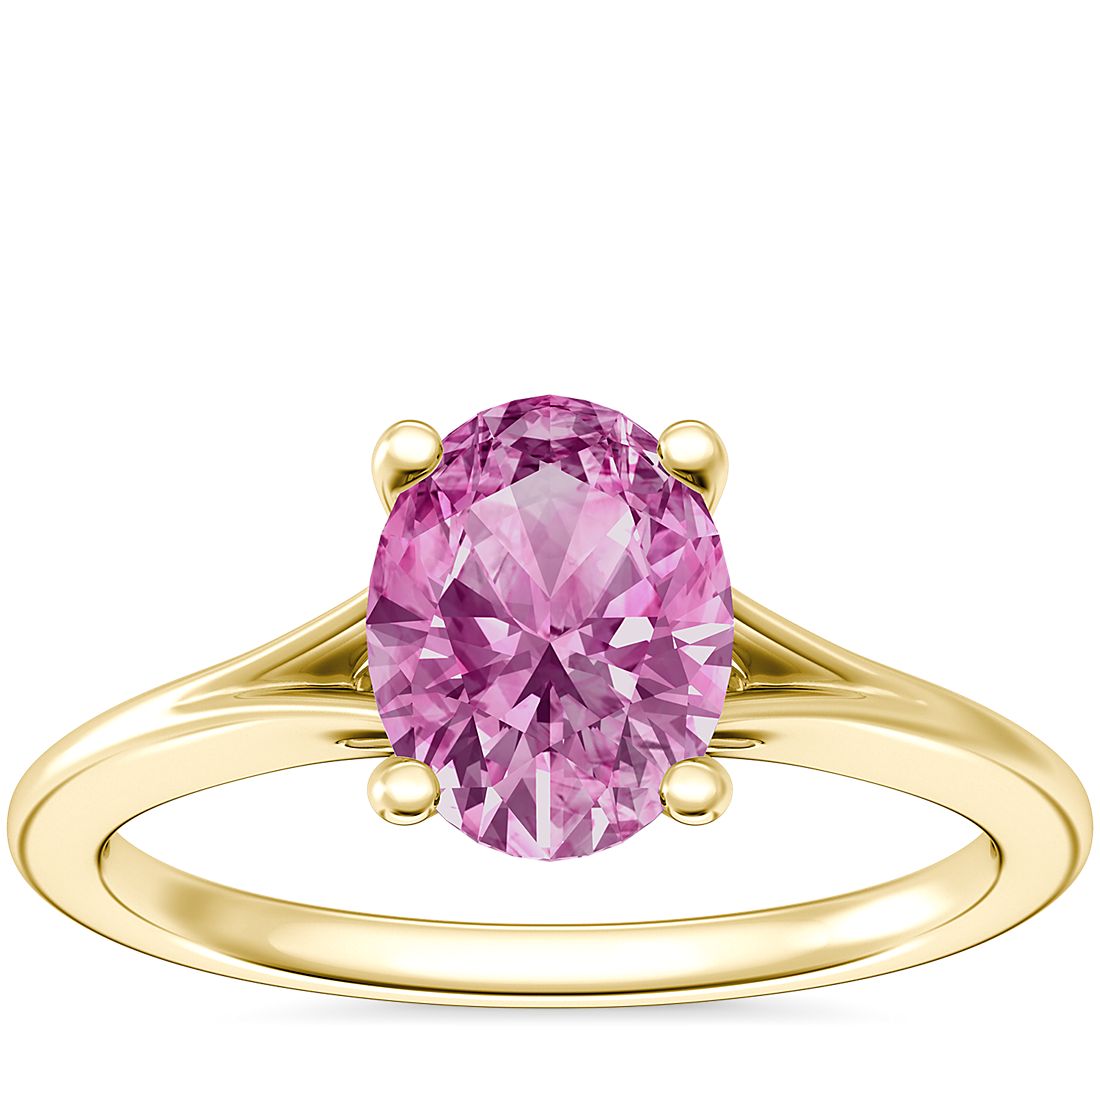 Petite Split Shank Solitaire Engagement Ring with Oval Pink Sapphire in 18k Yellow Gold (8x6mm)